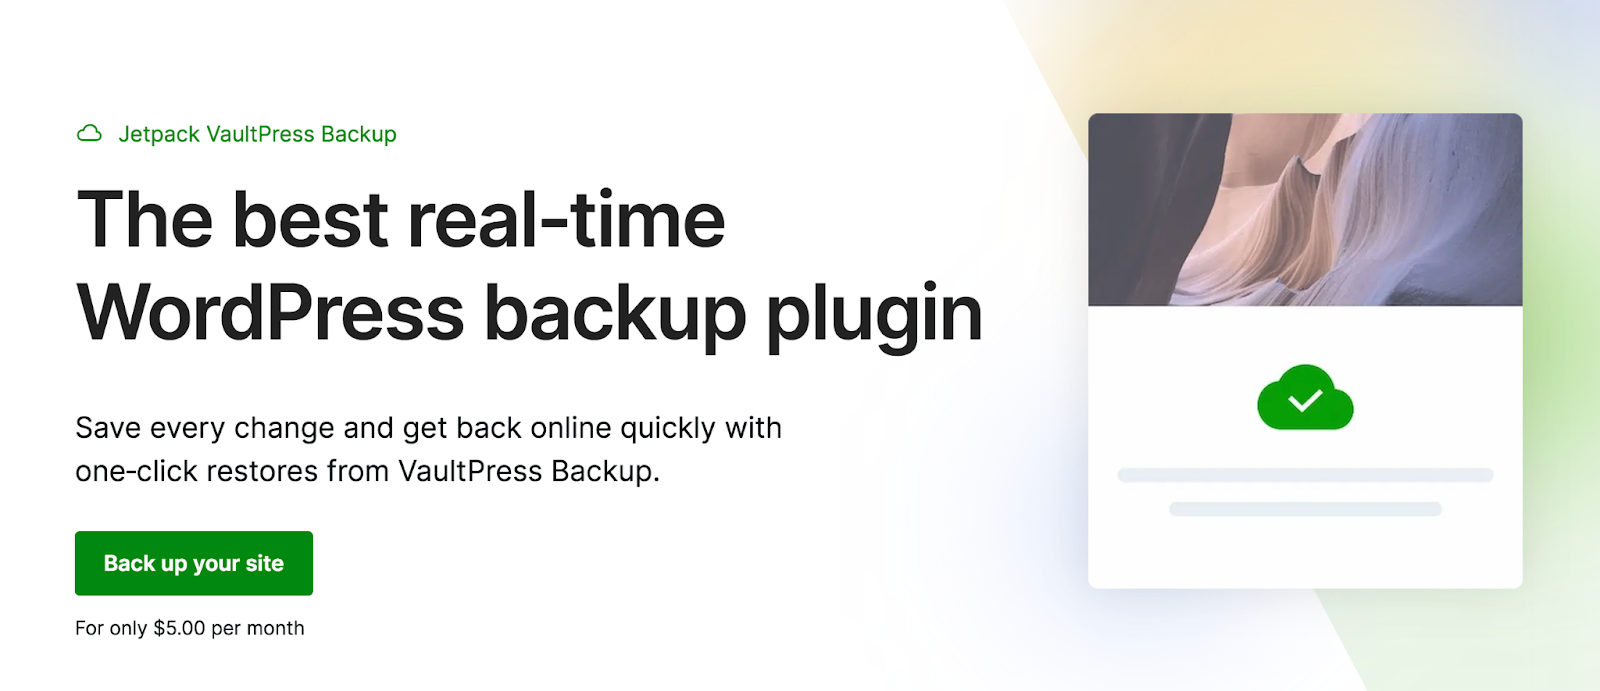 Jetpack VaultPress Backup homepage with the text "The best real-time WordPress backup plugin."